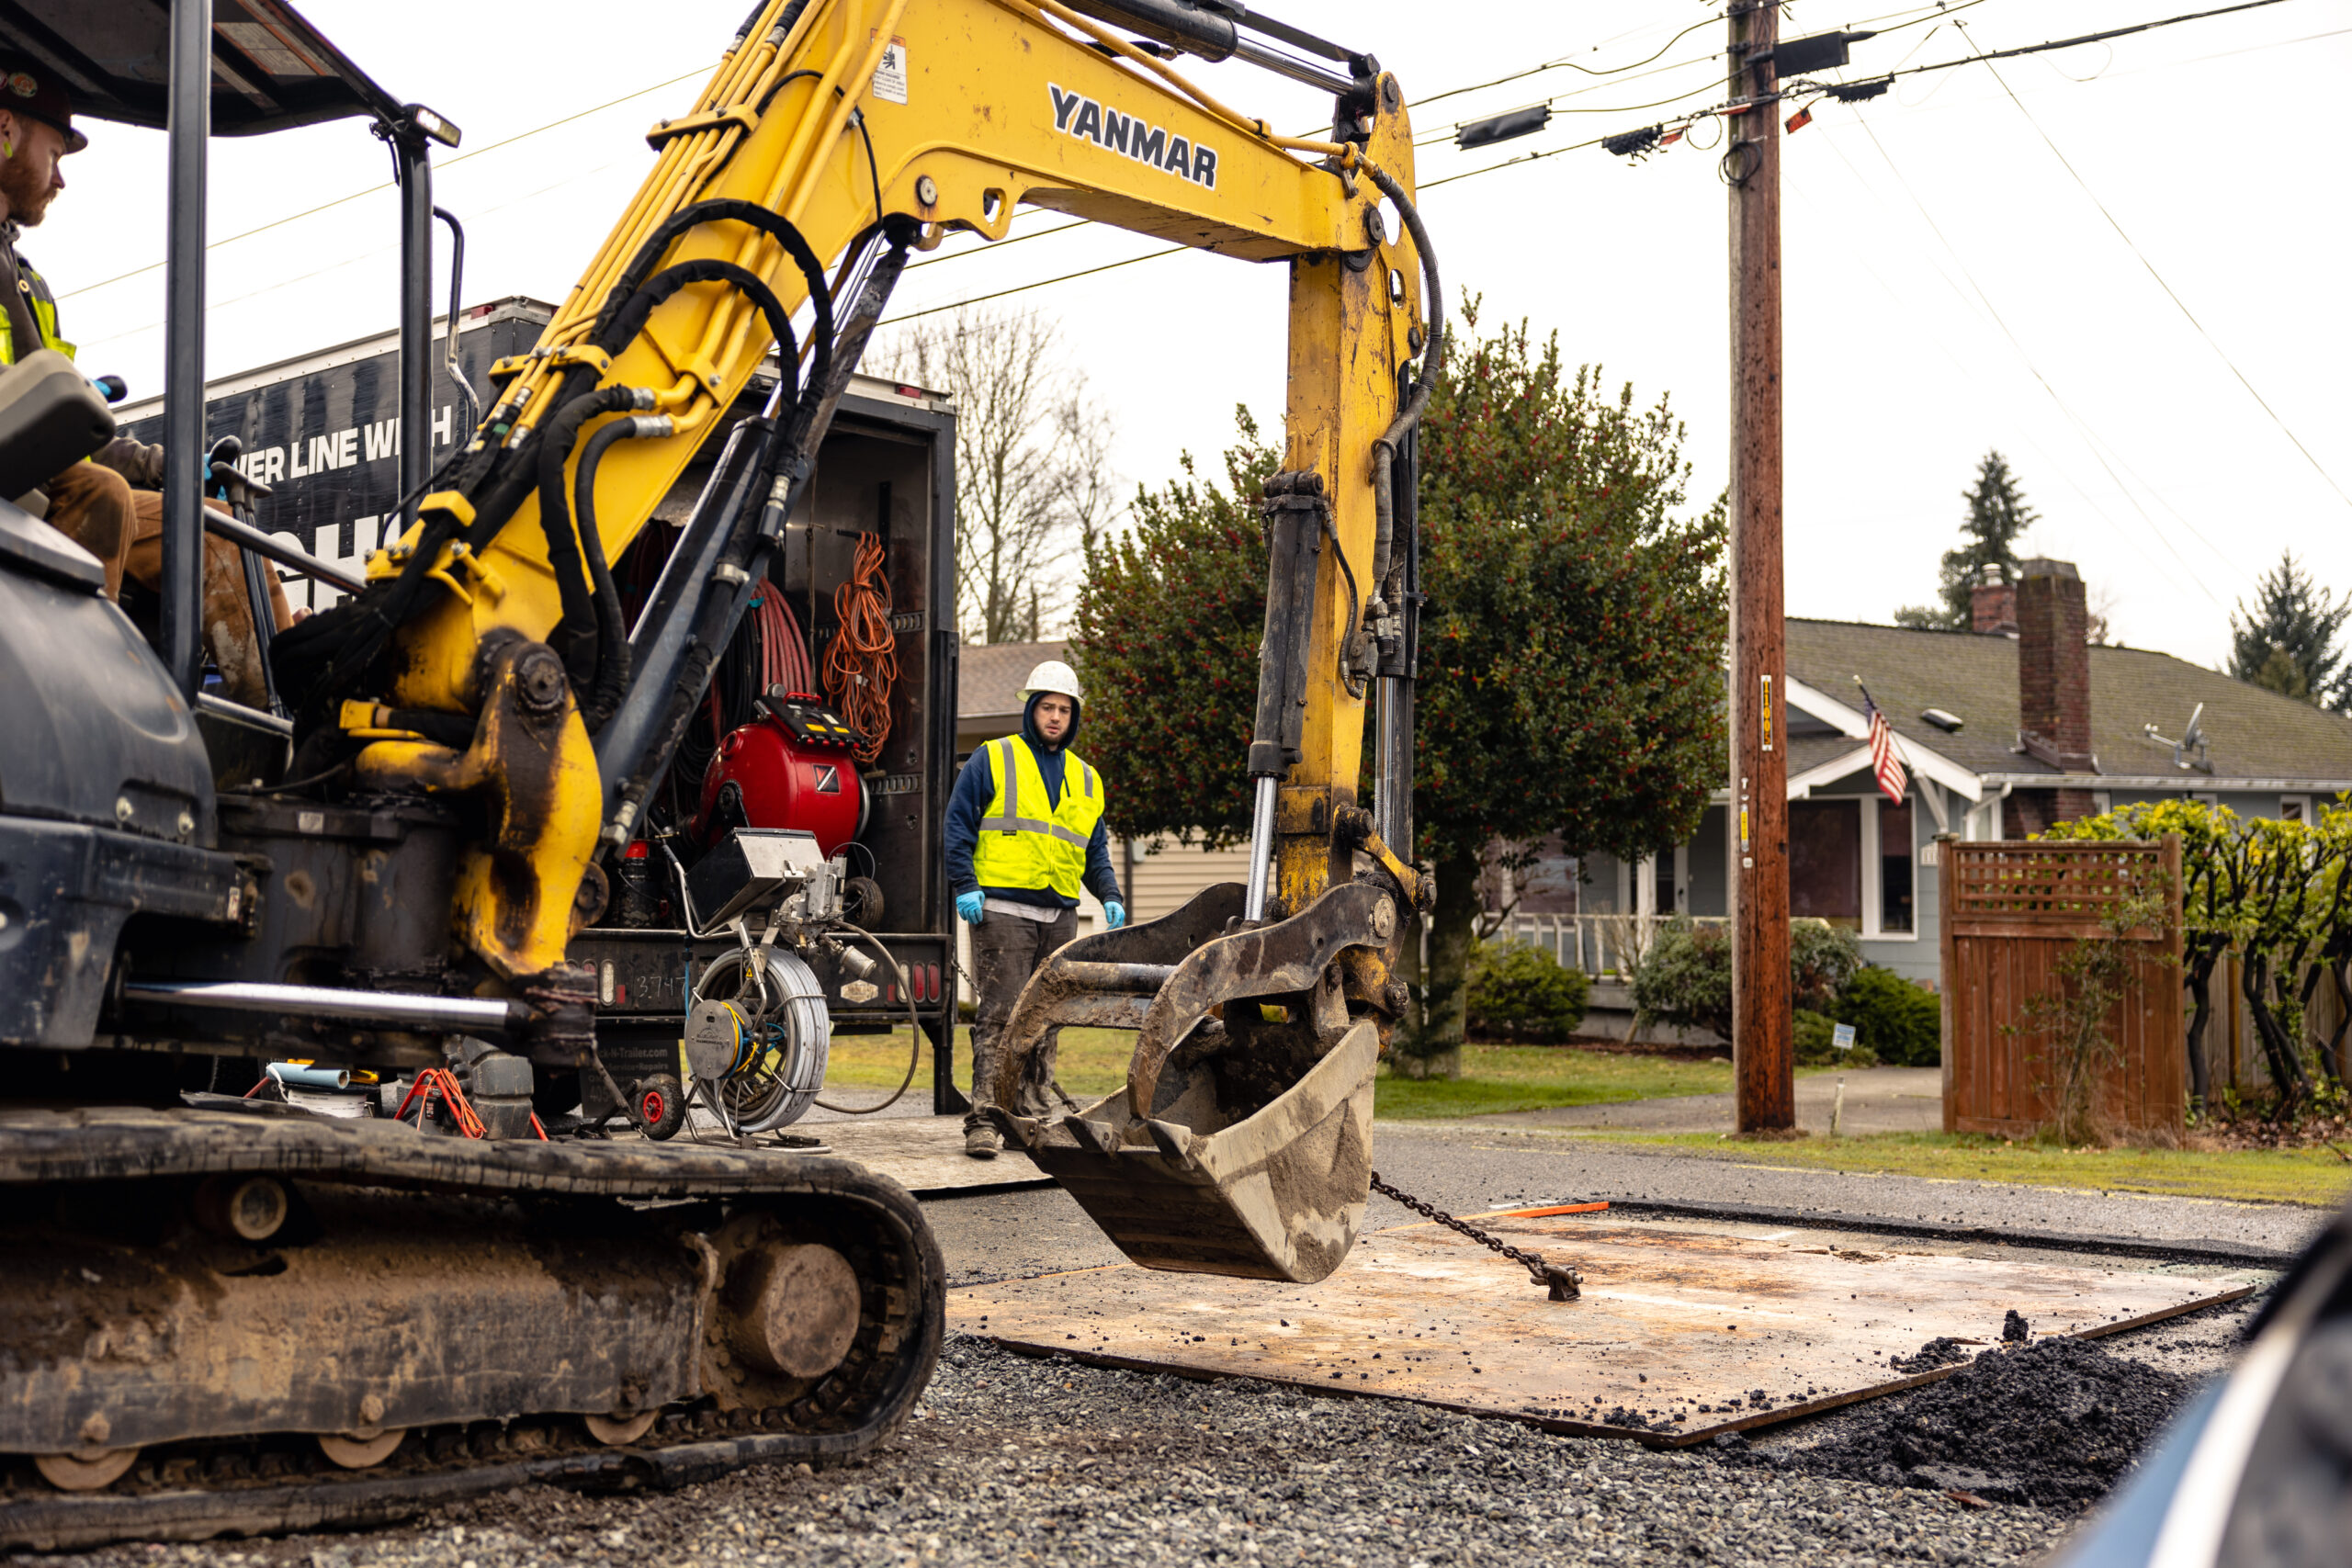 A PRICOR professional uses an excavator to break ground as a safety supervisor observes.